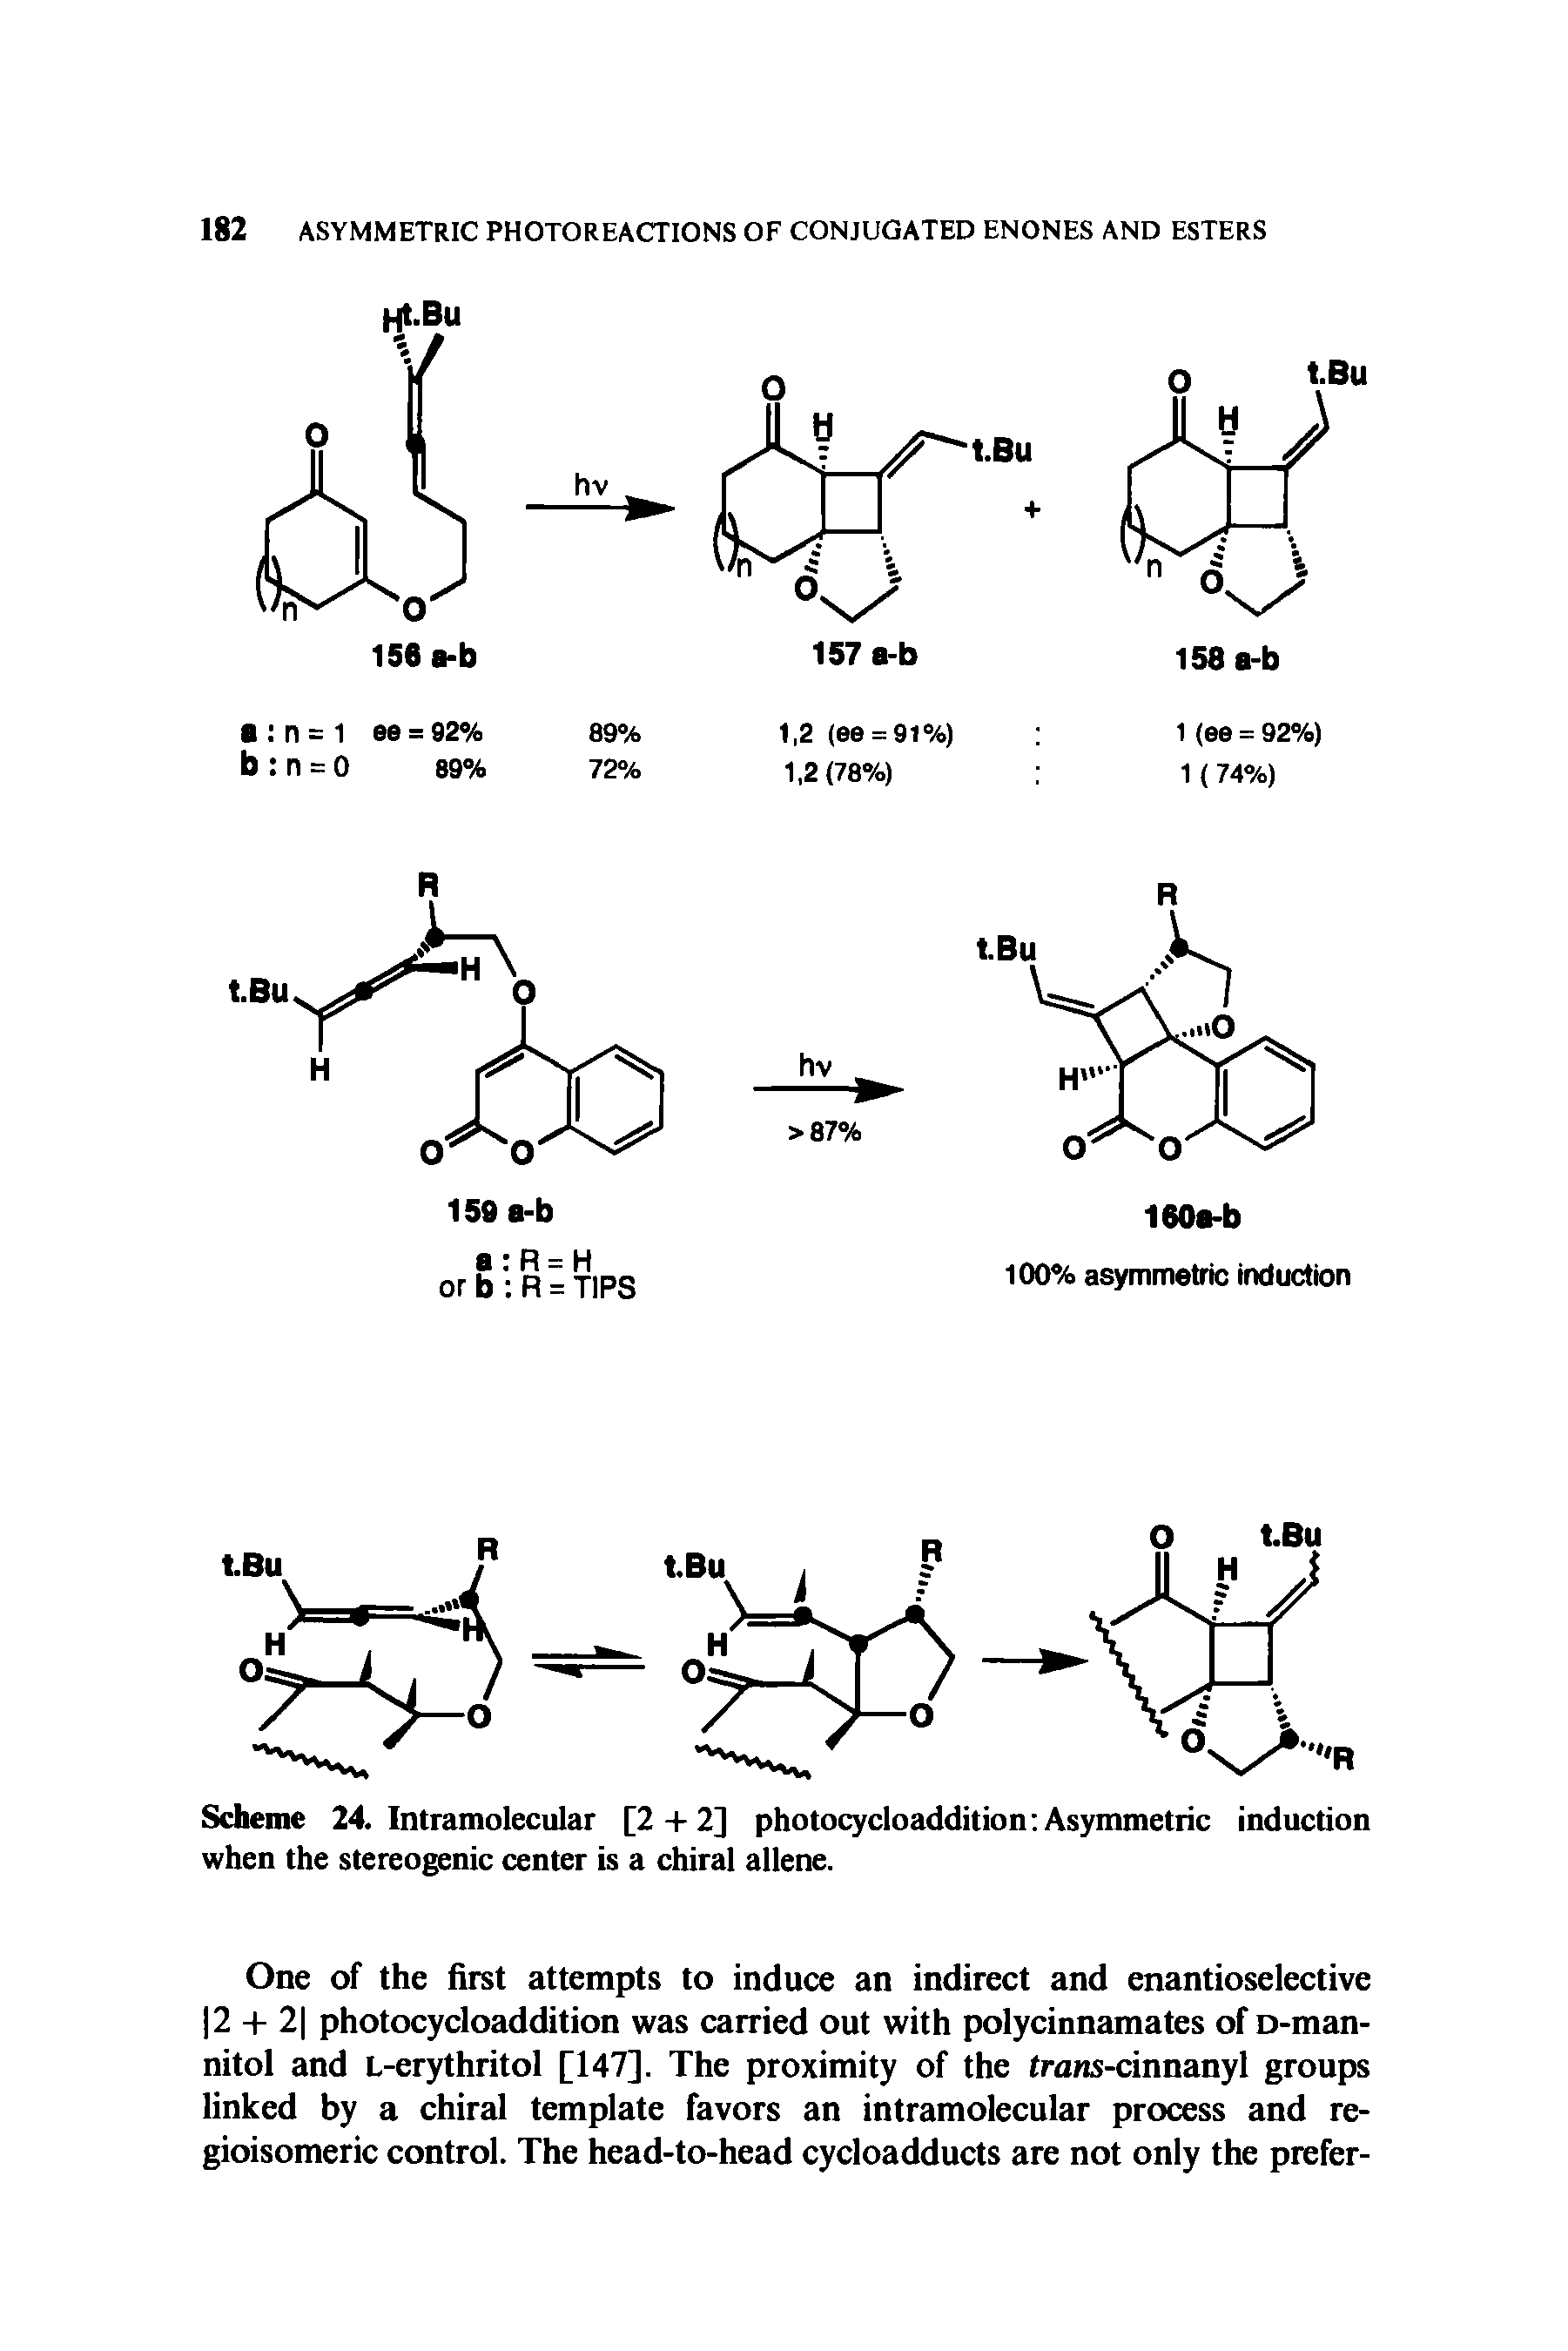 Scheme 24. Intramolecular [2 + 2] photocycloaddition Asymmetric induction when the stereogenic center is a chiral allene.